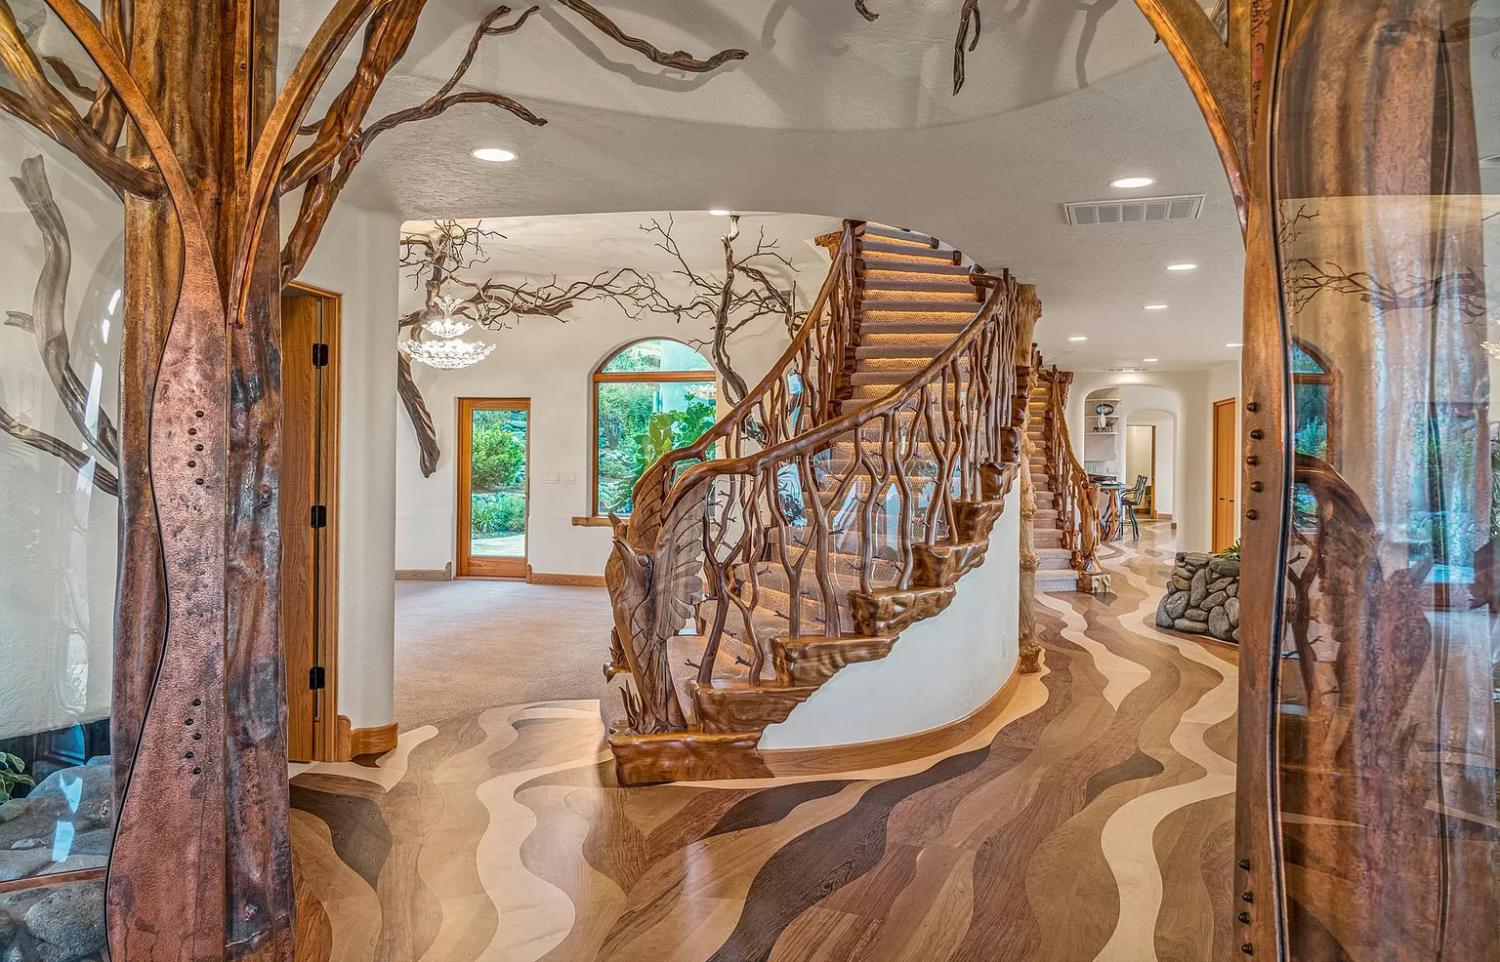 Unique Oregon Home With Custom Handcrafted Stairs, and wooden natural details